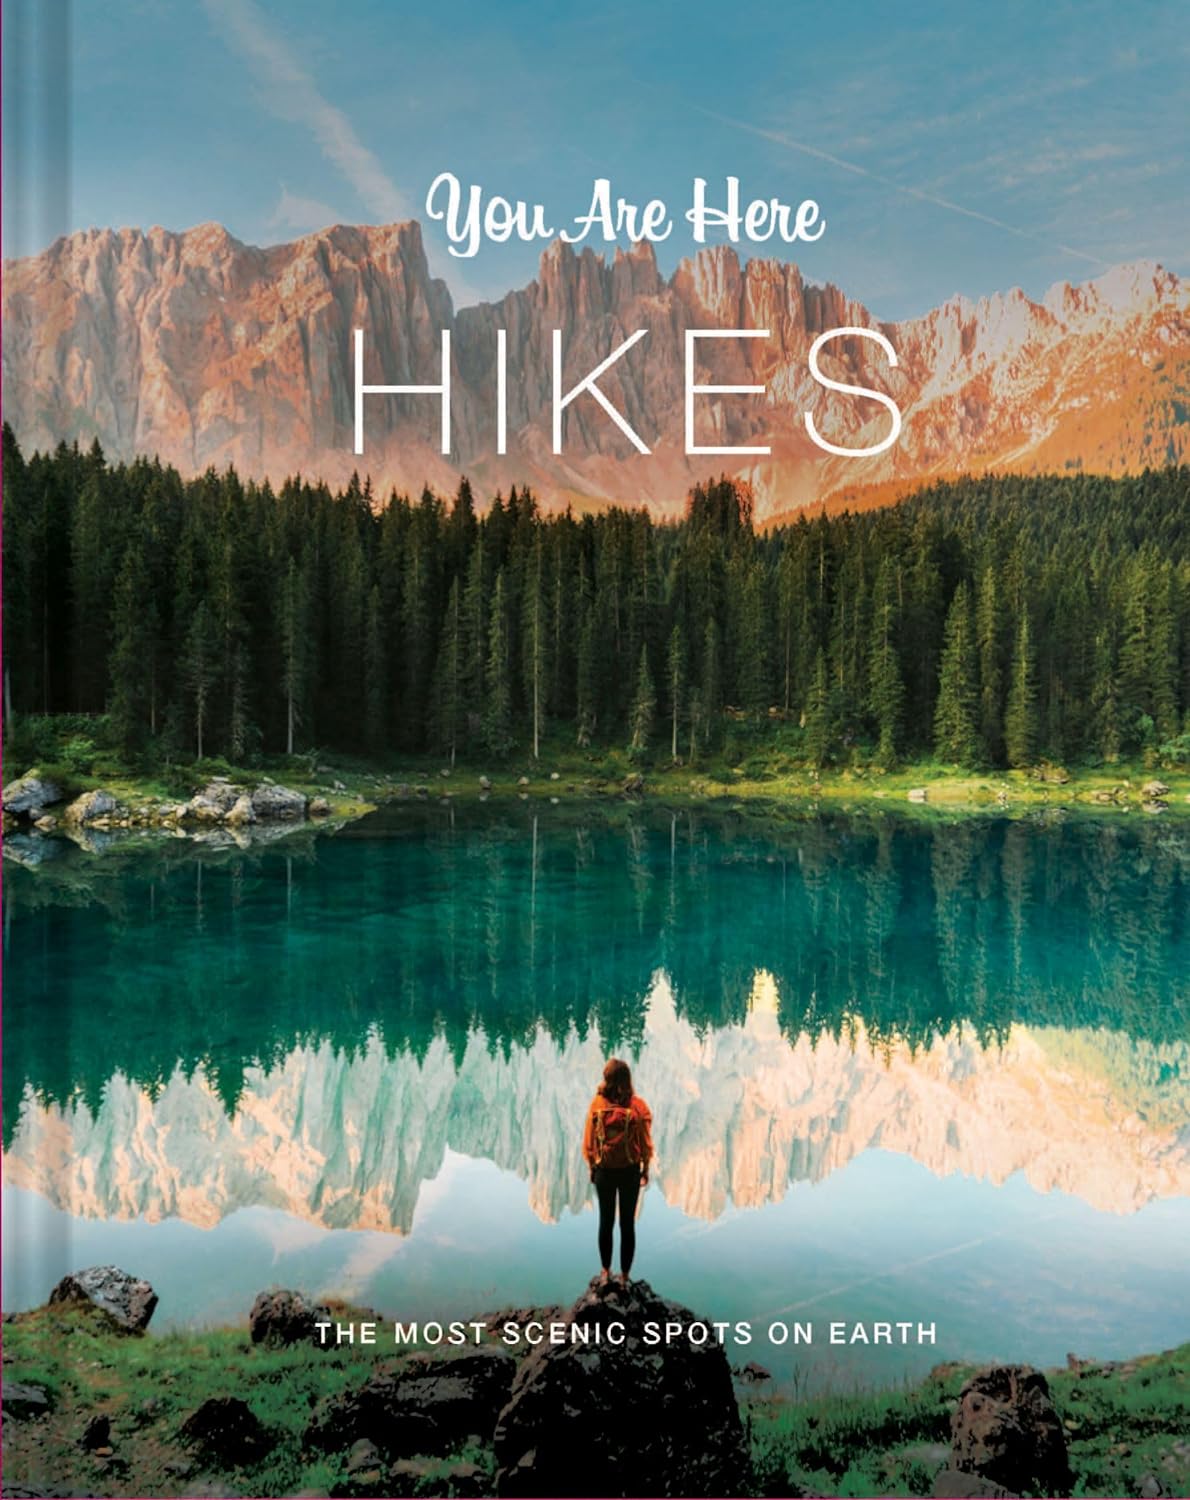 You Are Here: Hikes: The Most Scenic Spots on Earth